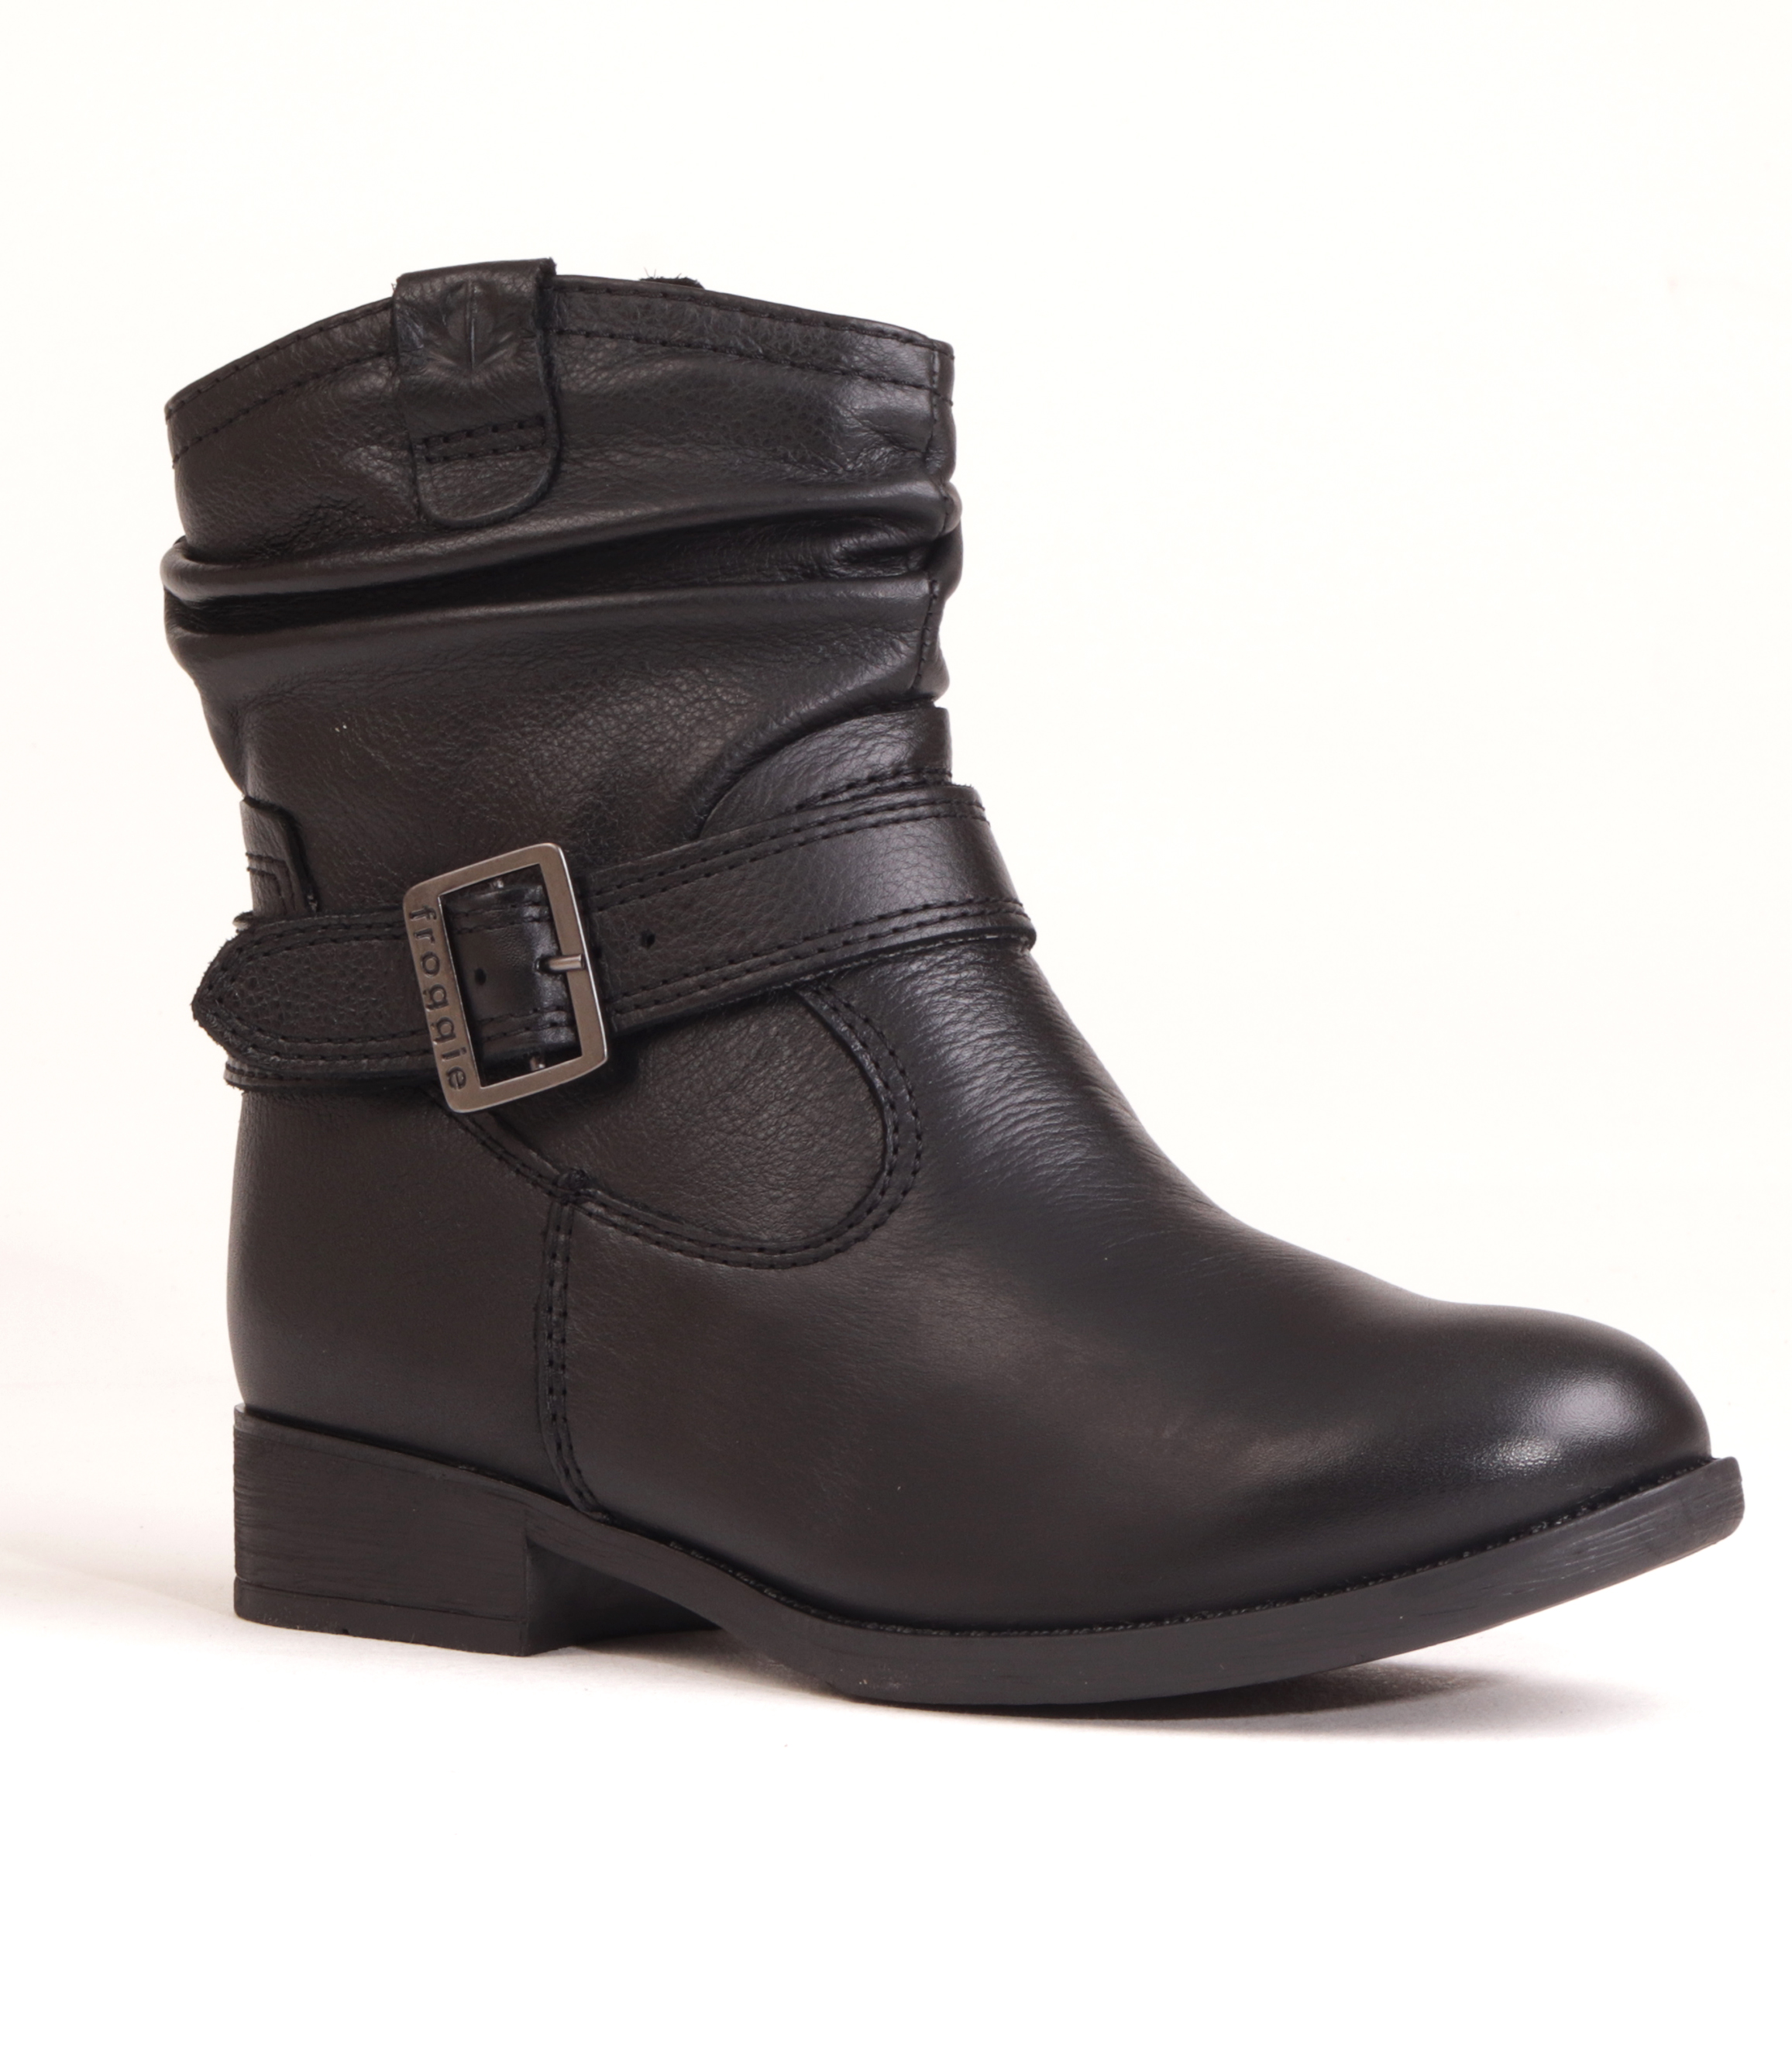 FROGGIE BLACK LEATHER RUCHED BUCKLE BOOT | Rosella - Style inspired by ...